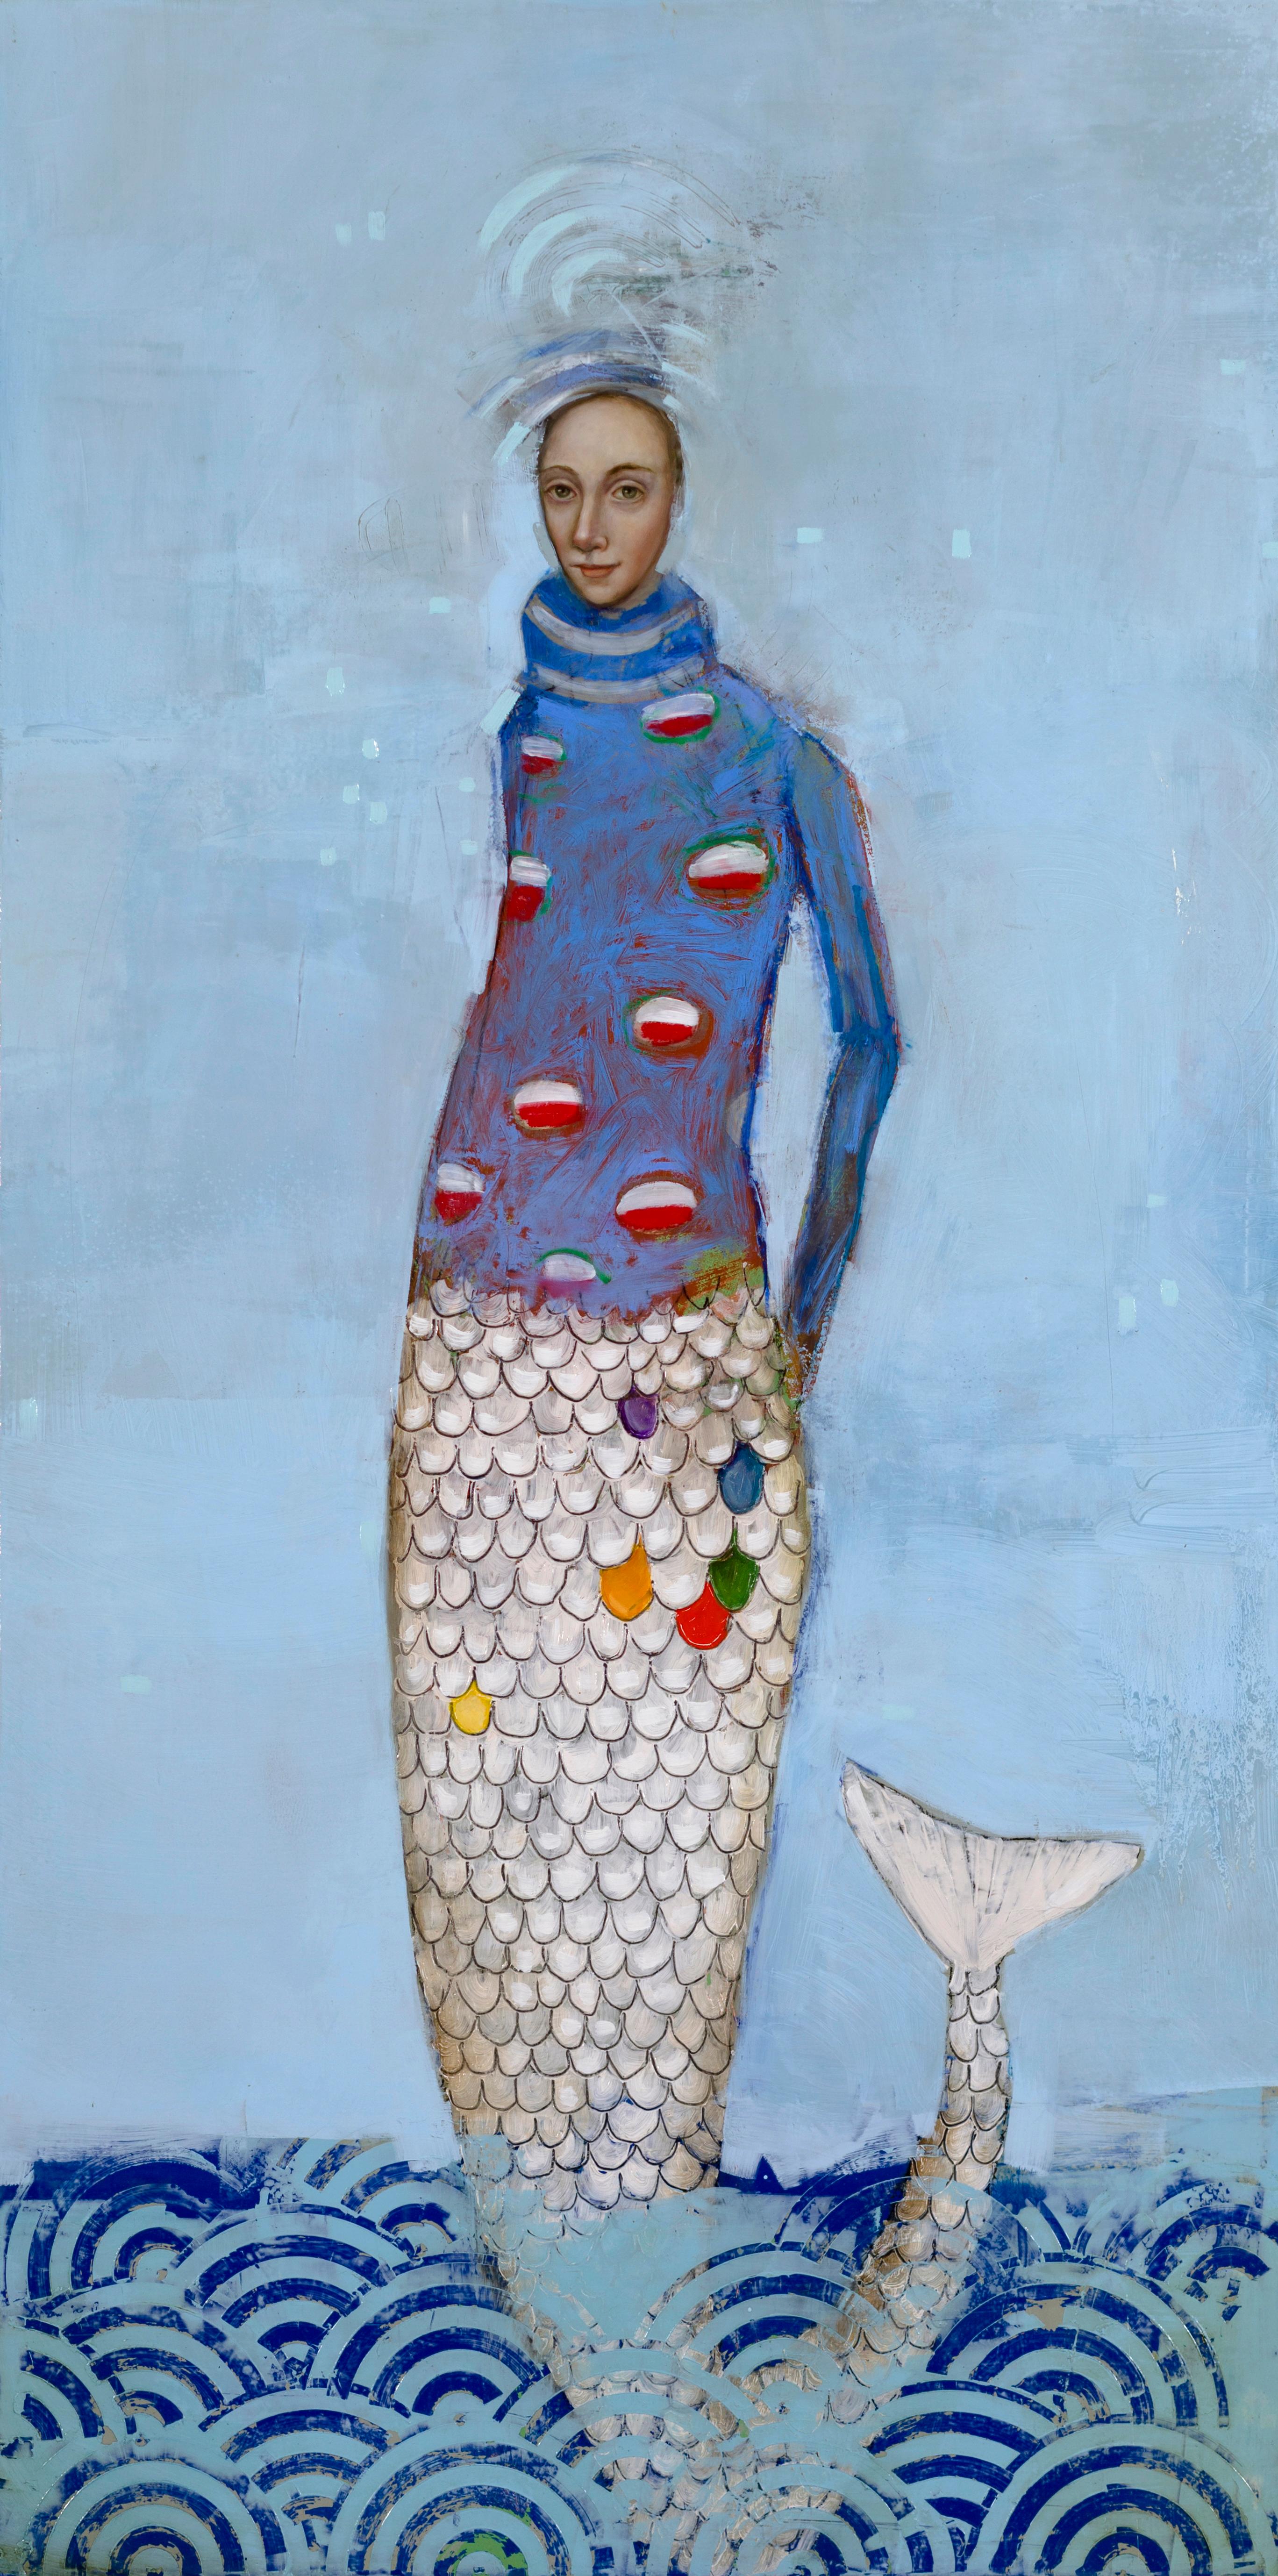 Michele Mikesell Figurative Painting - Yemaya Sea Mermaid, Oil on canvas, figurative painting with blue pattern palette